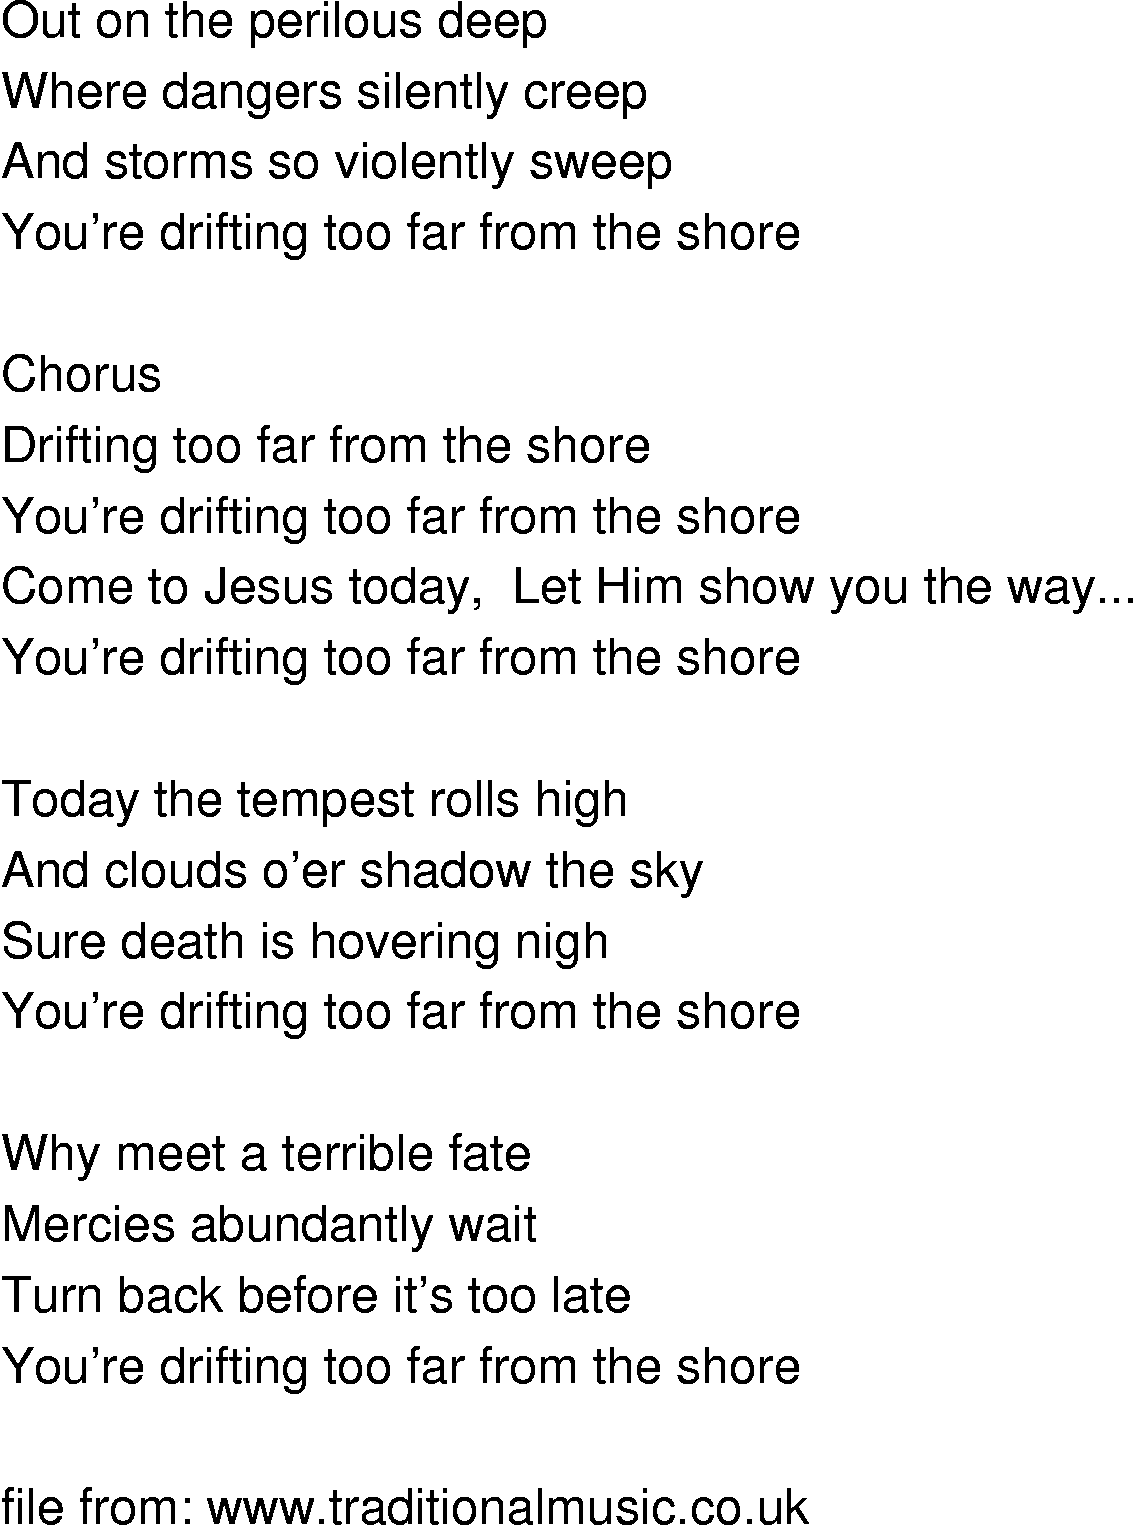 Old-Time (oldtimey) Song Lyrics - drifting too far from the shore